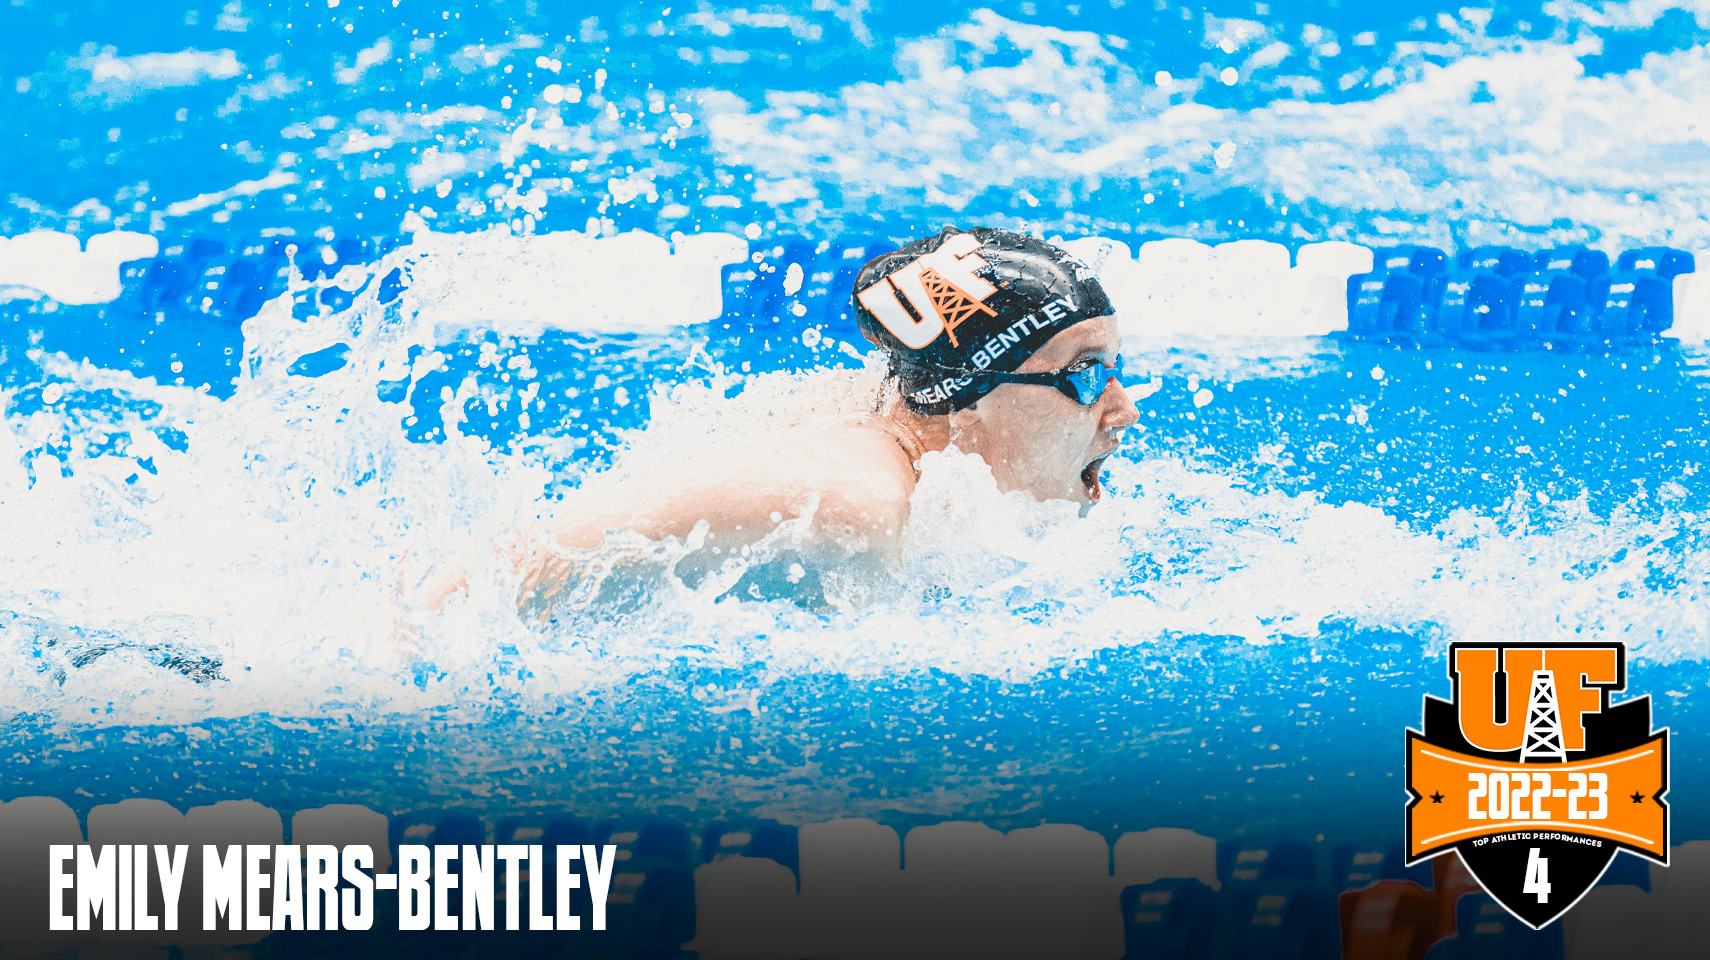 Top-10 Individual Performances | #4 Emily Mears-Bentley